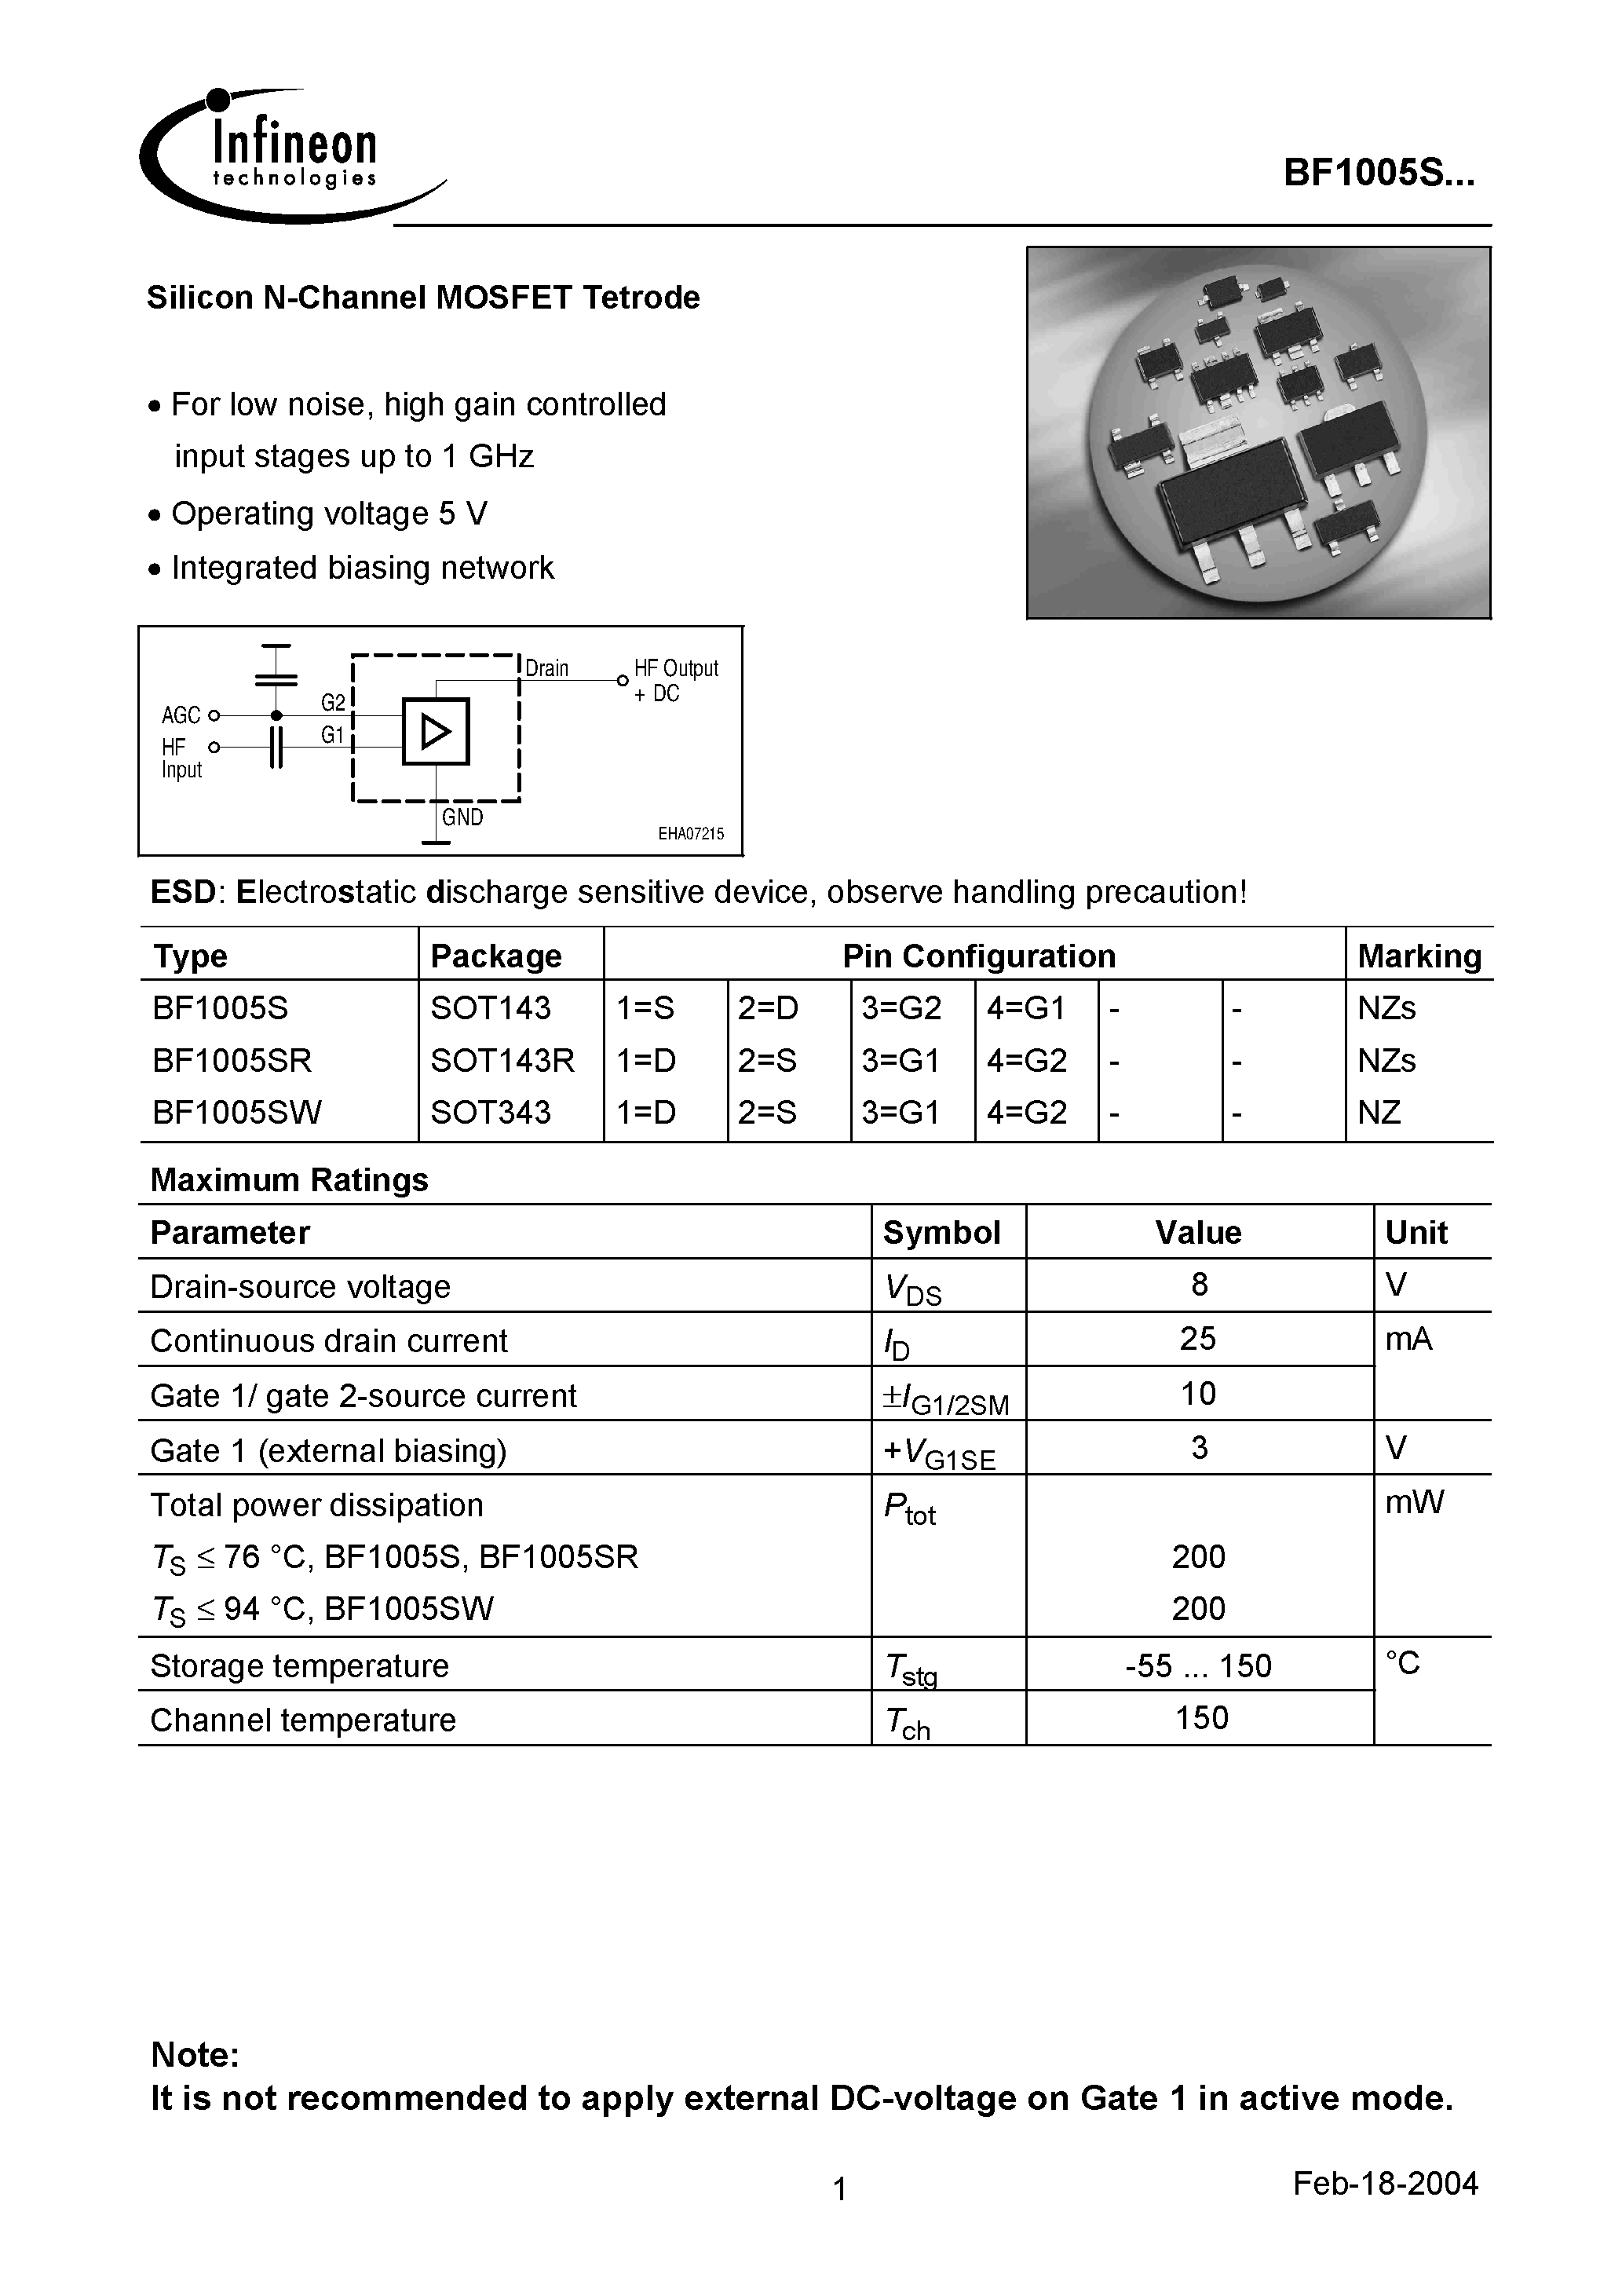 Даташит BF1005S - Silicon N-Channel MOSFET Tetrode страница 1